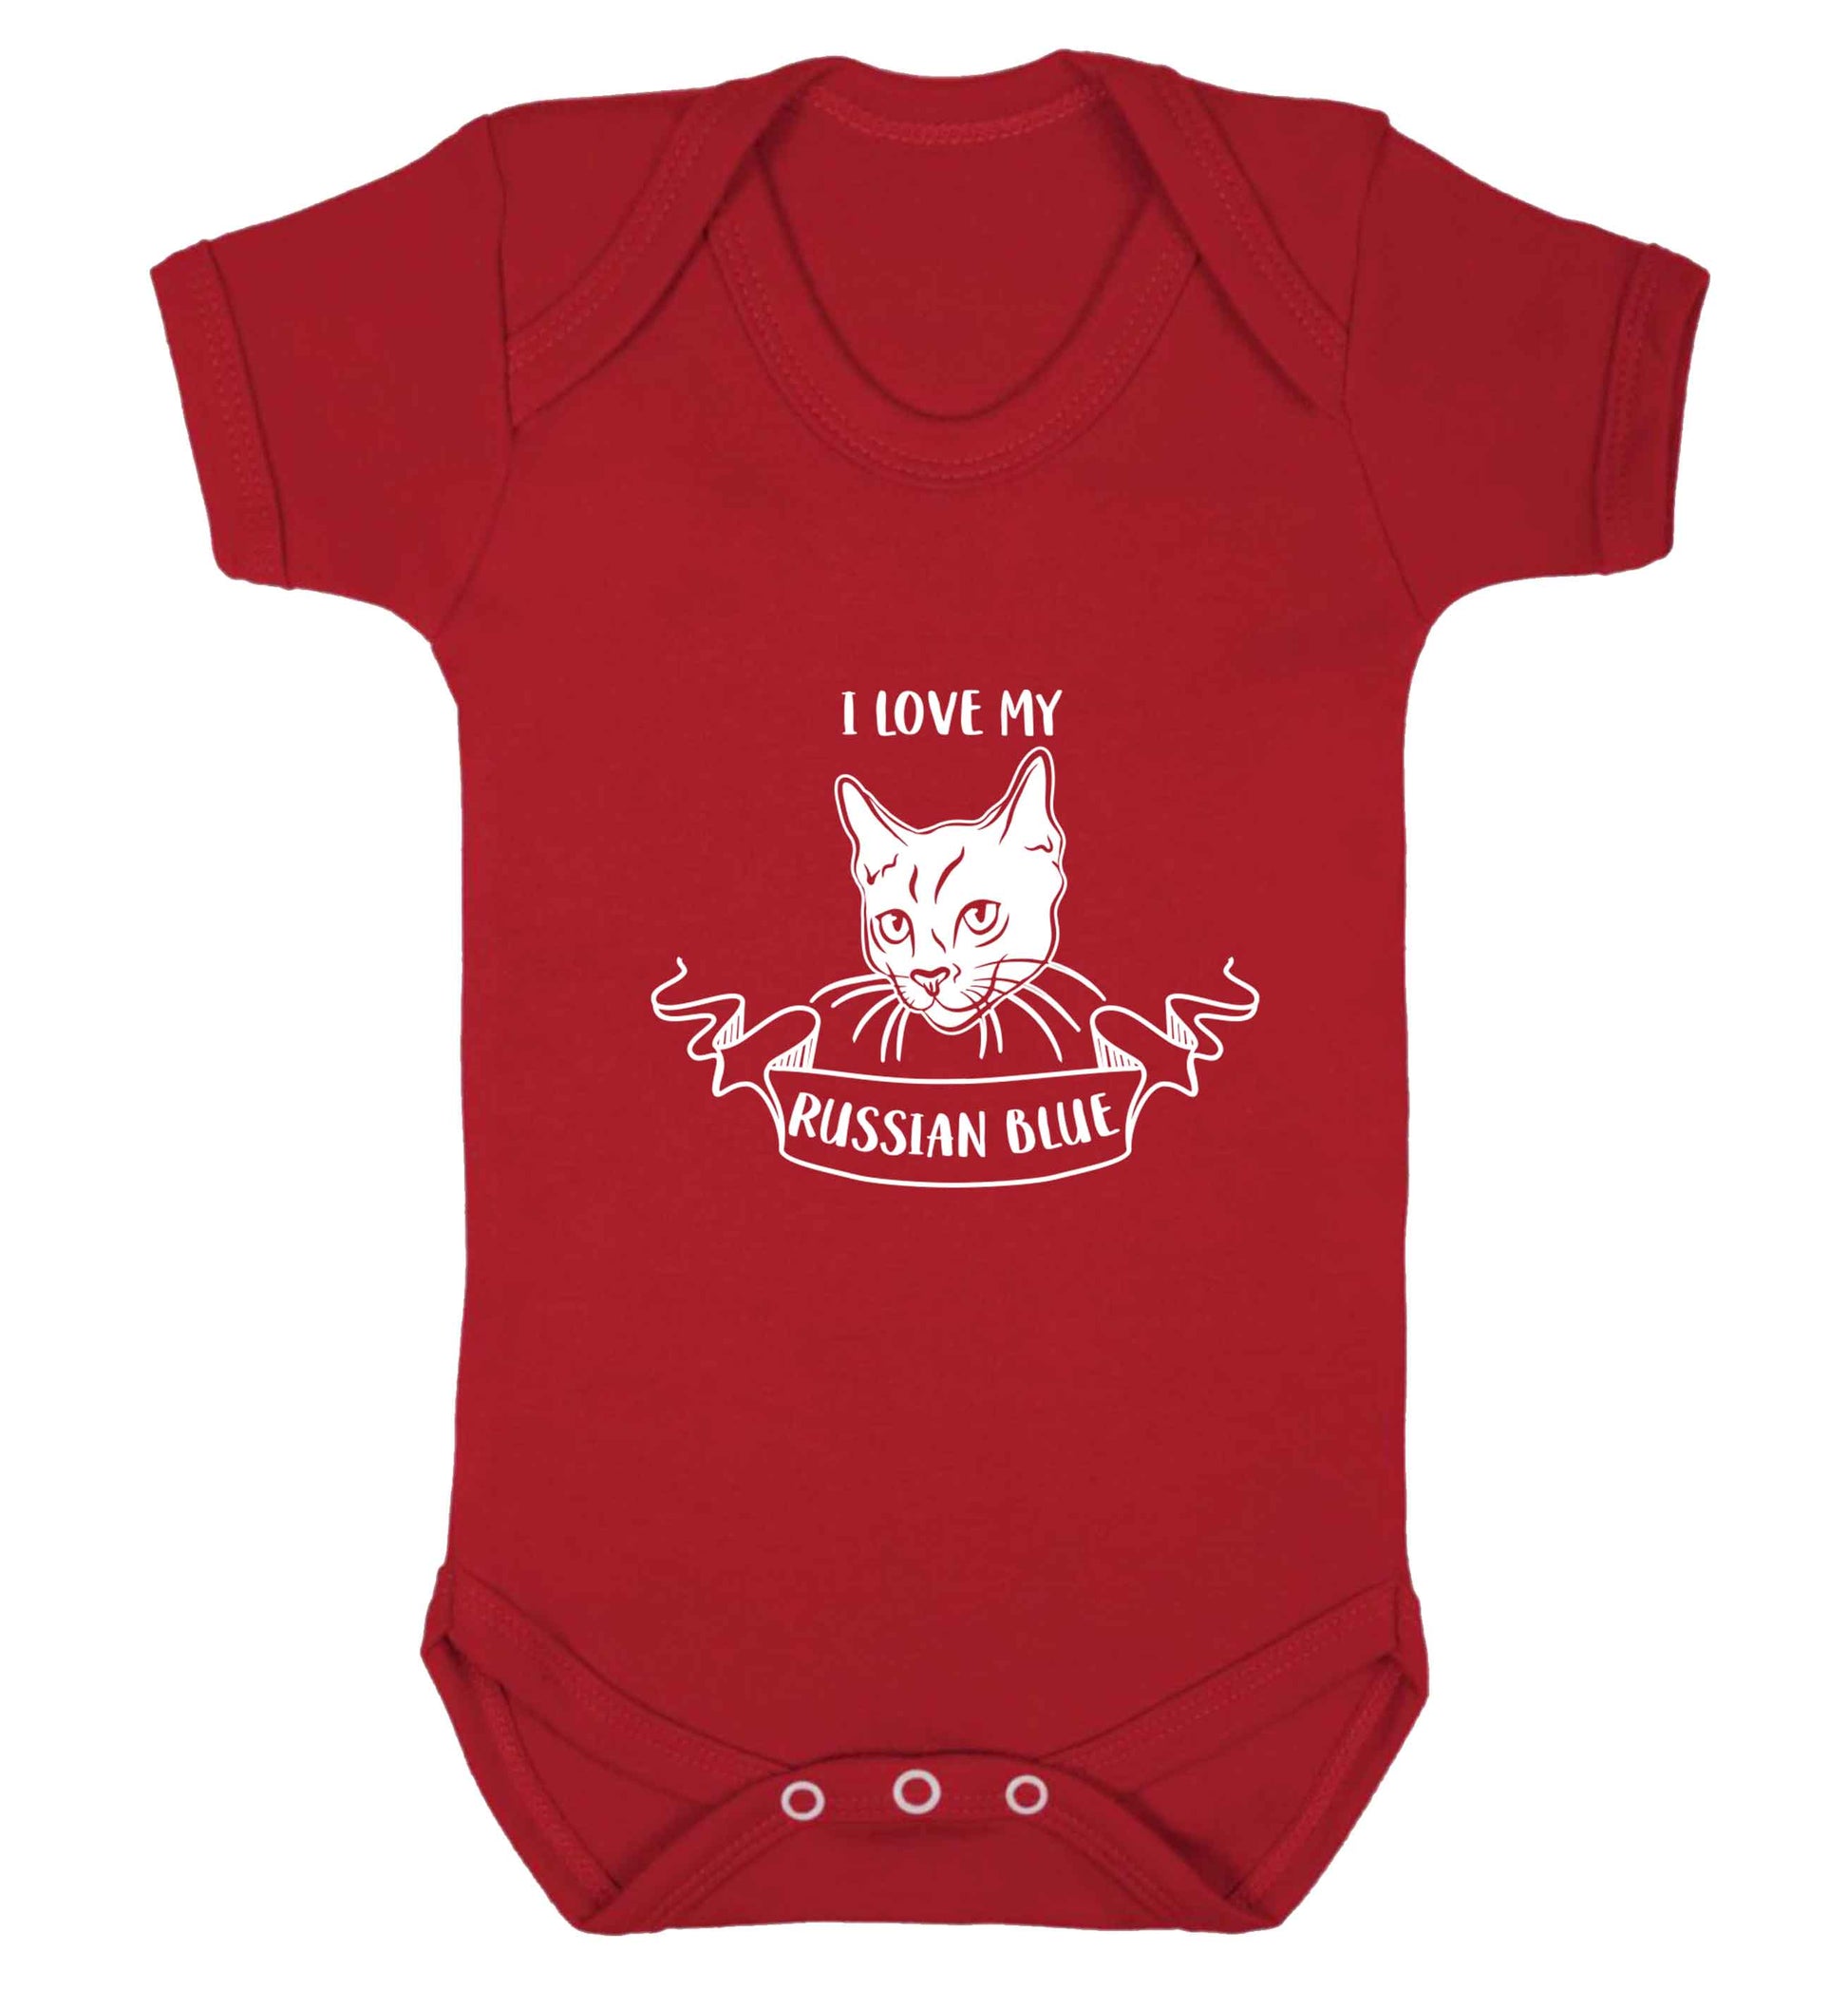 I love my russian blue baby vest red 18-24 months